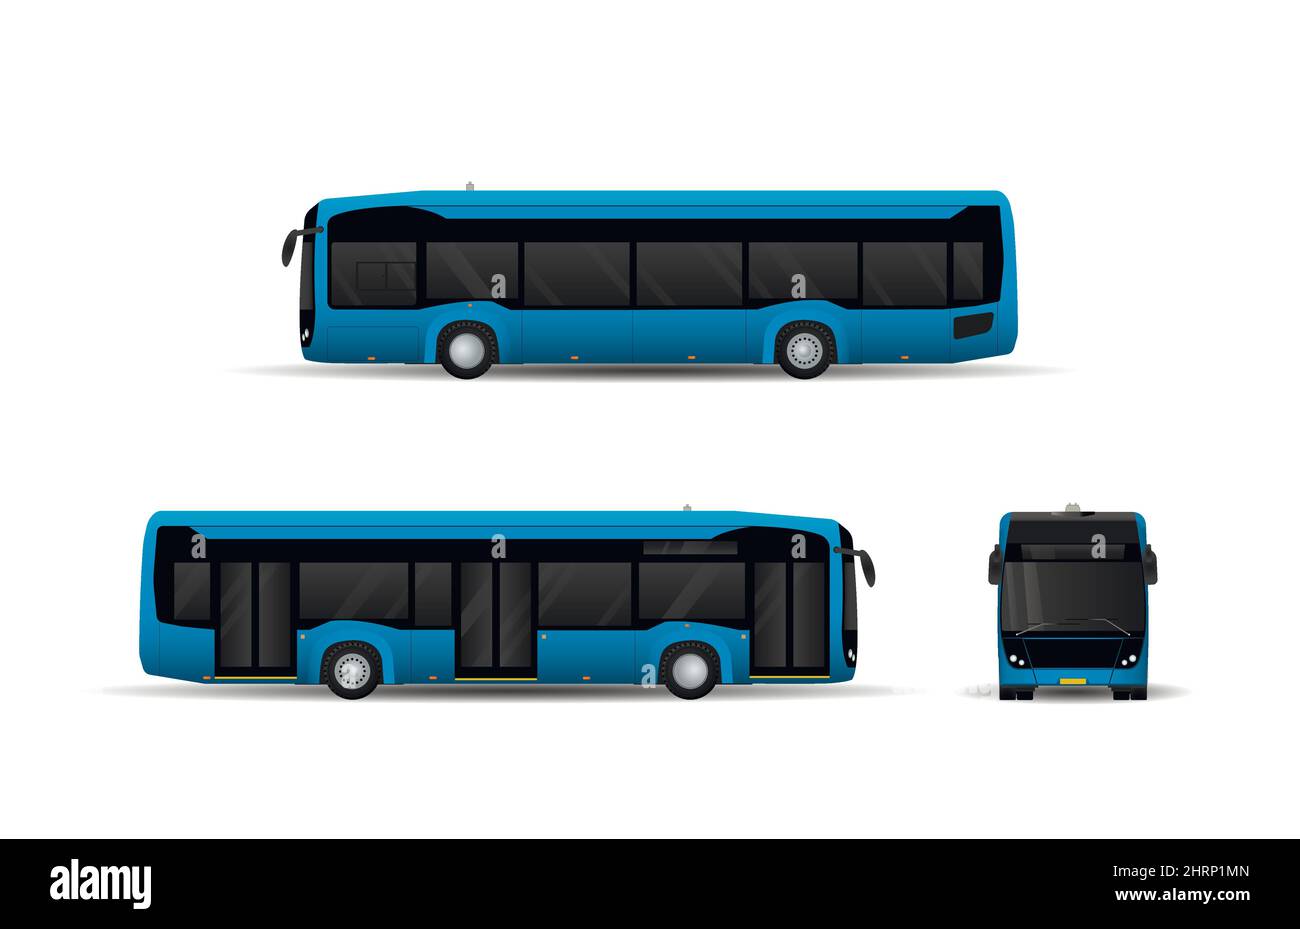 Modern blue urban low-floor electric bus. Side view, front. Stock Vector